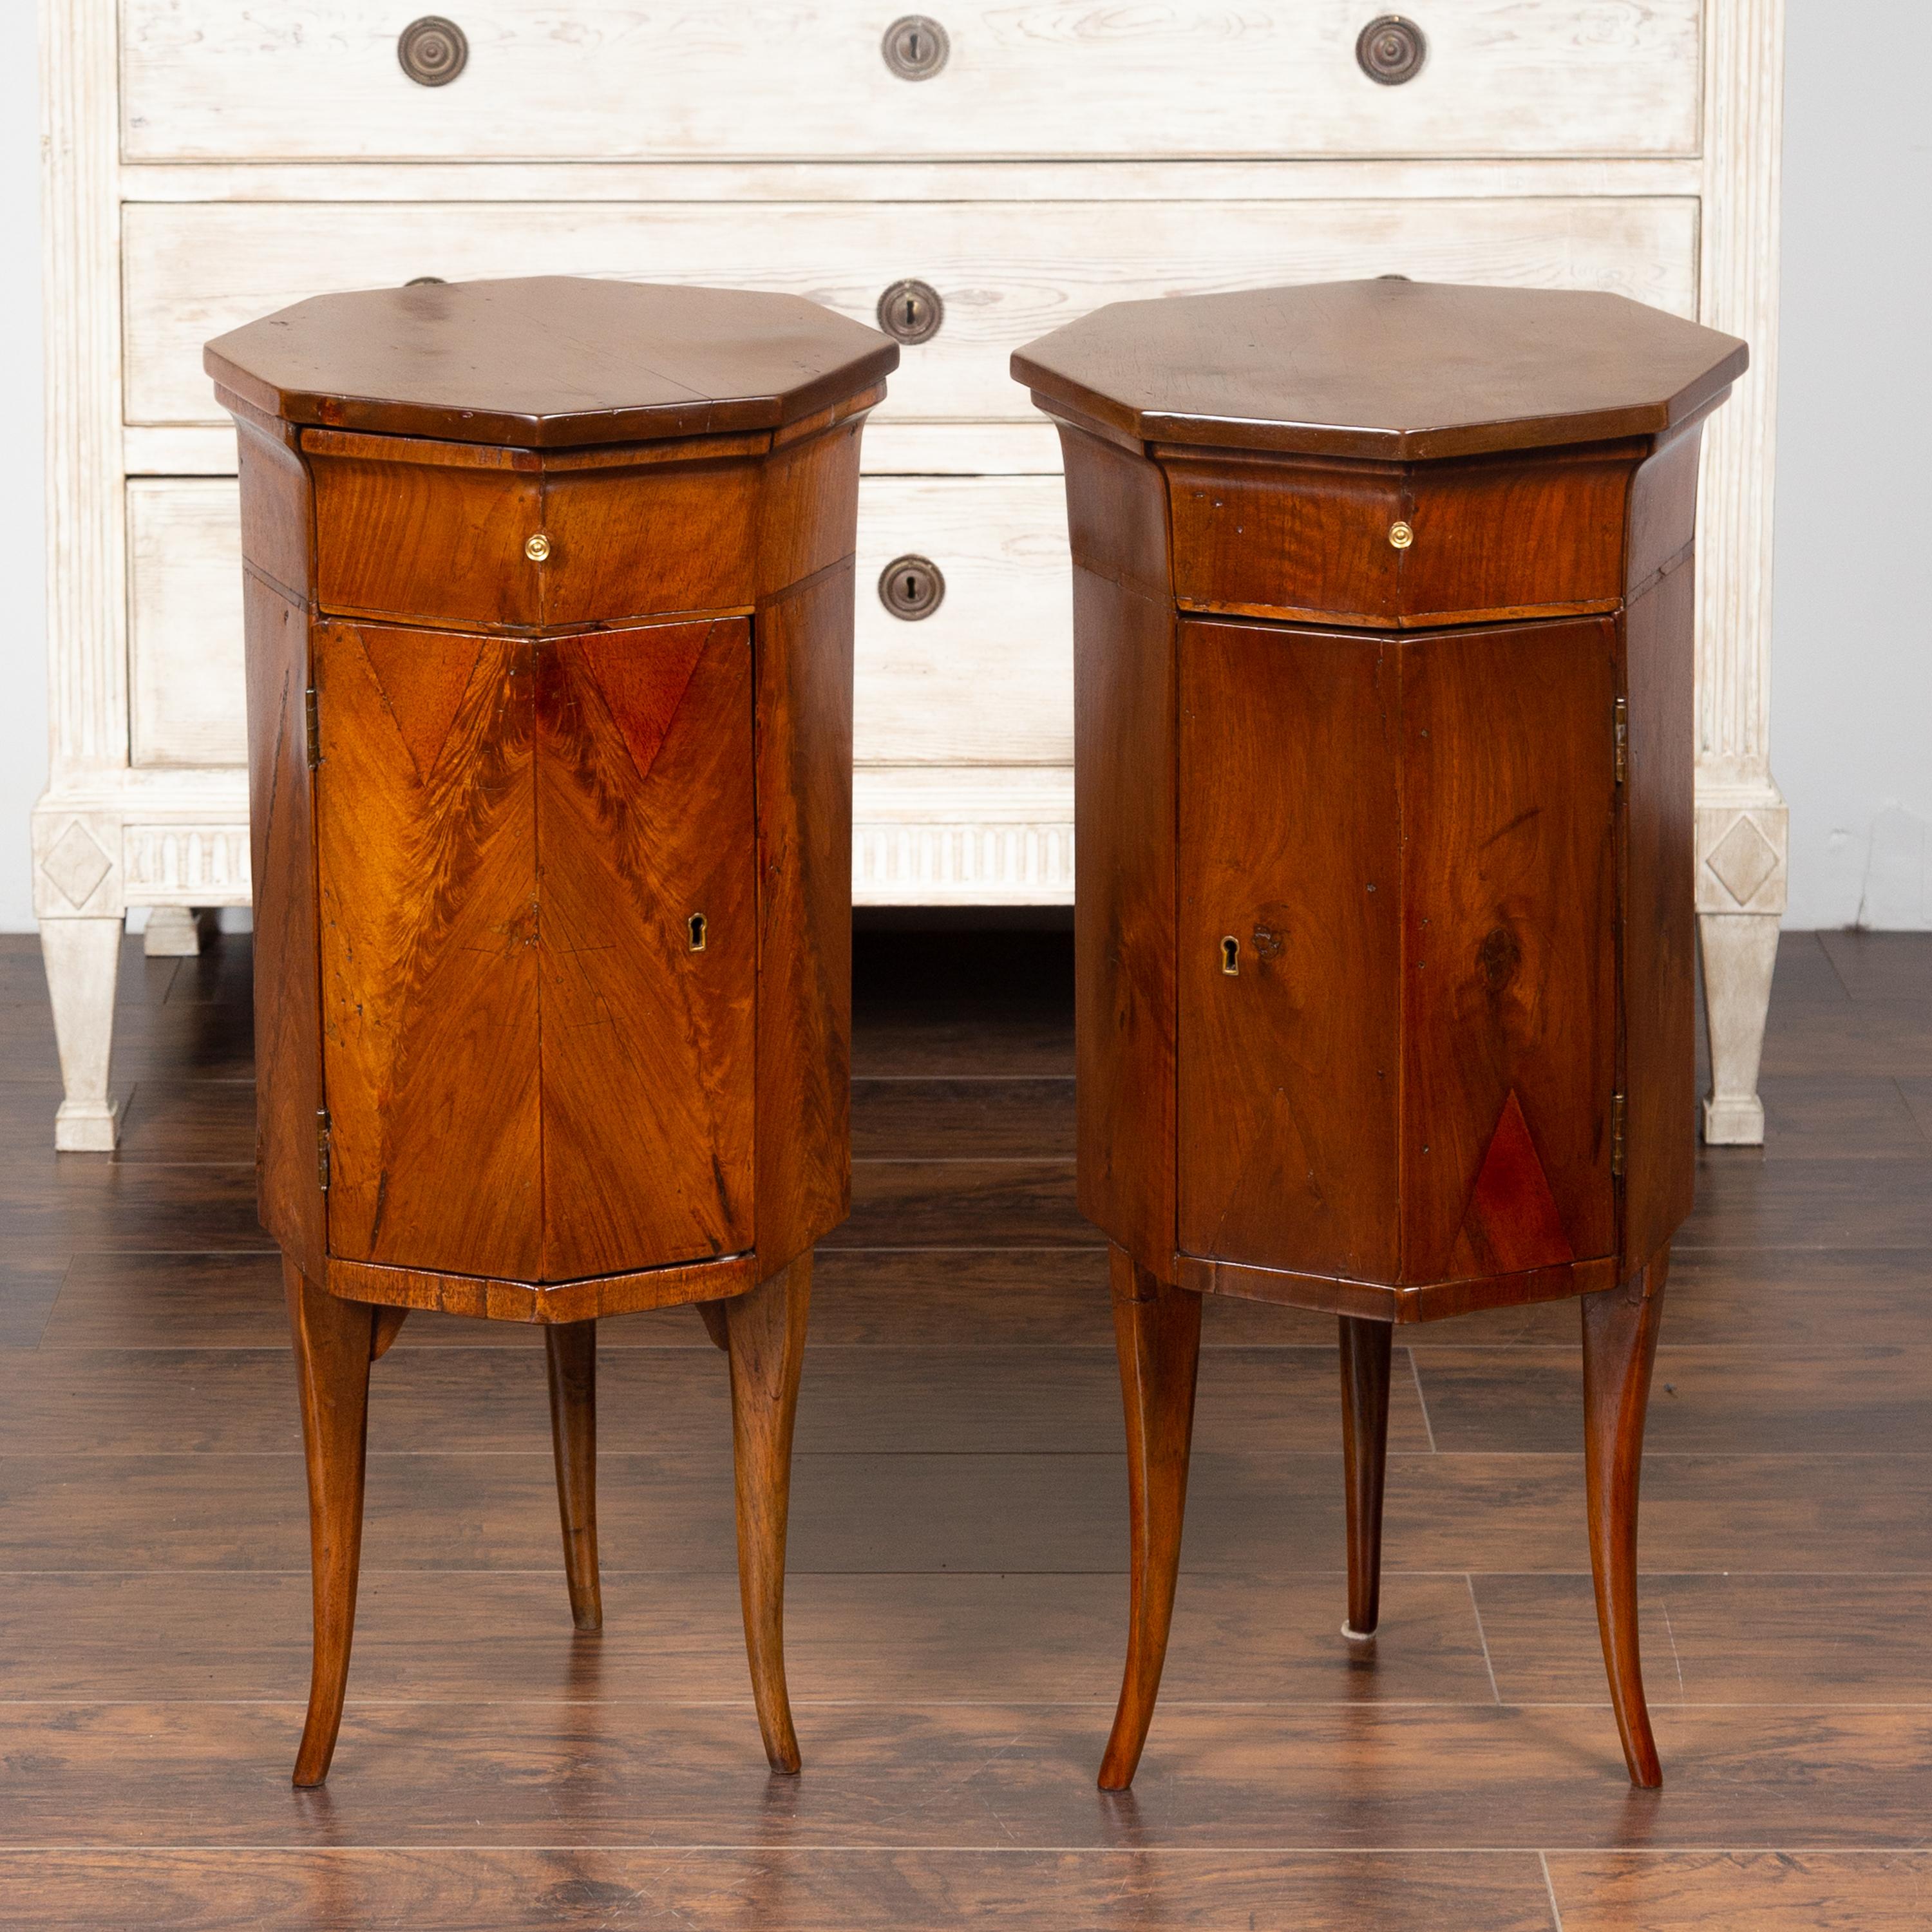 A pair of Italian walnut side tables from the early 19th century, with octagonal tops, drawers and doors. Created in Italy during the early years of the 19th century, each of this pair of walnut side tables features an octagonal top sitting above a